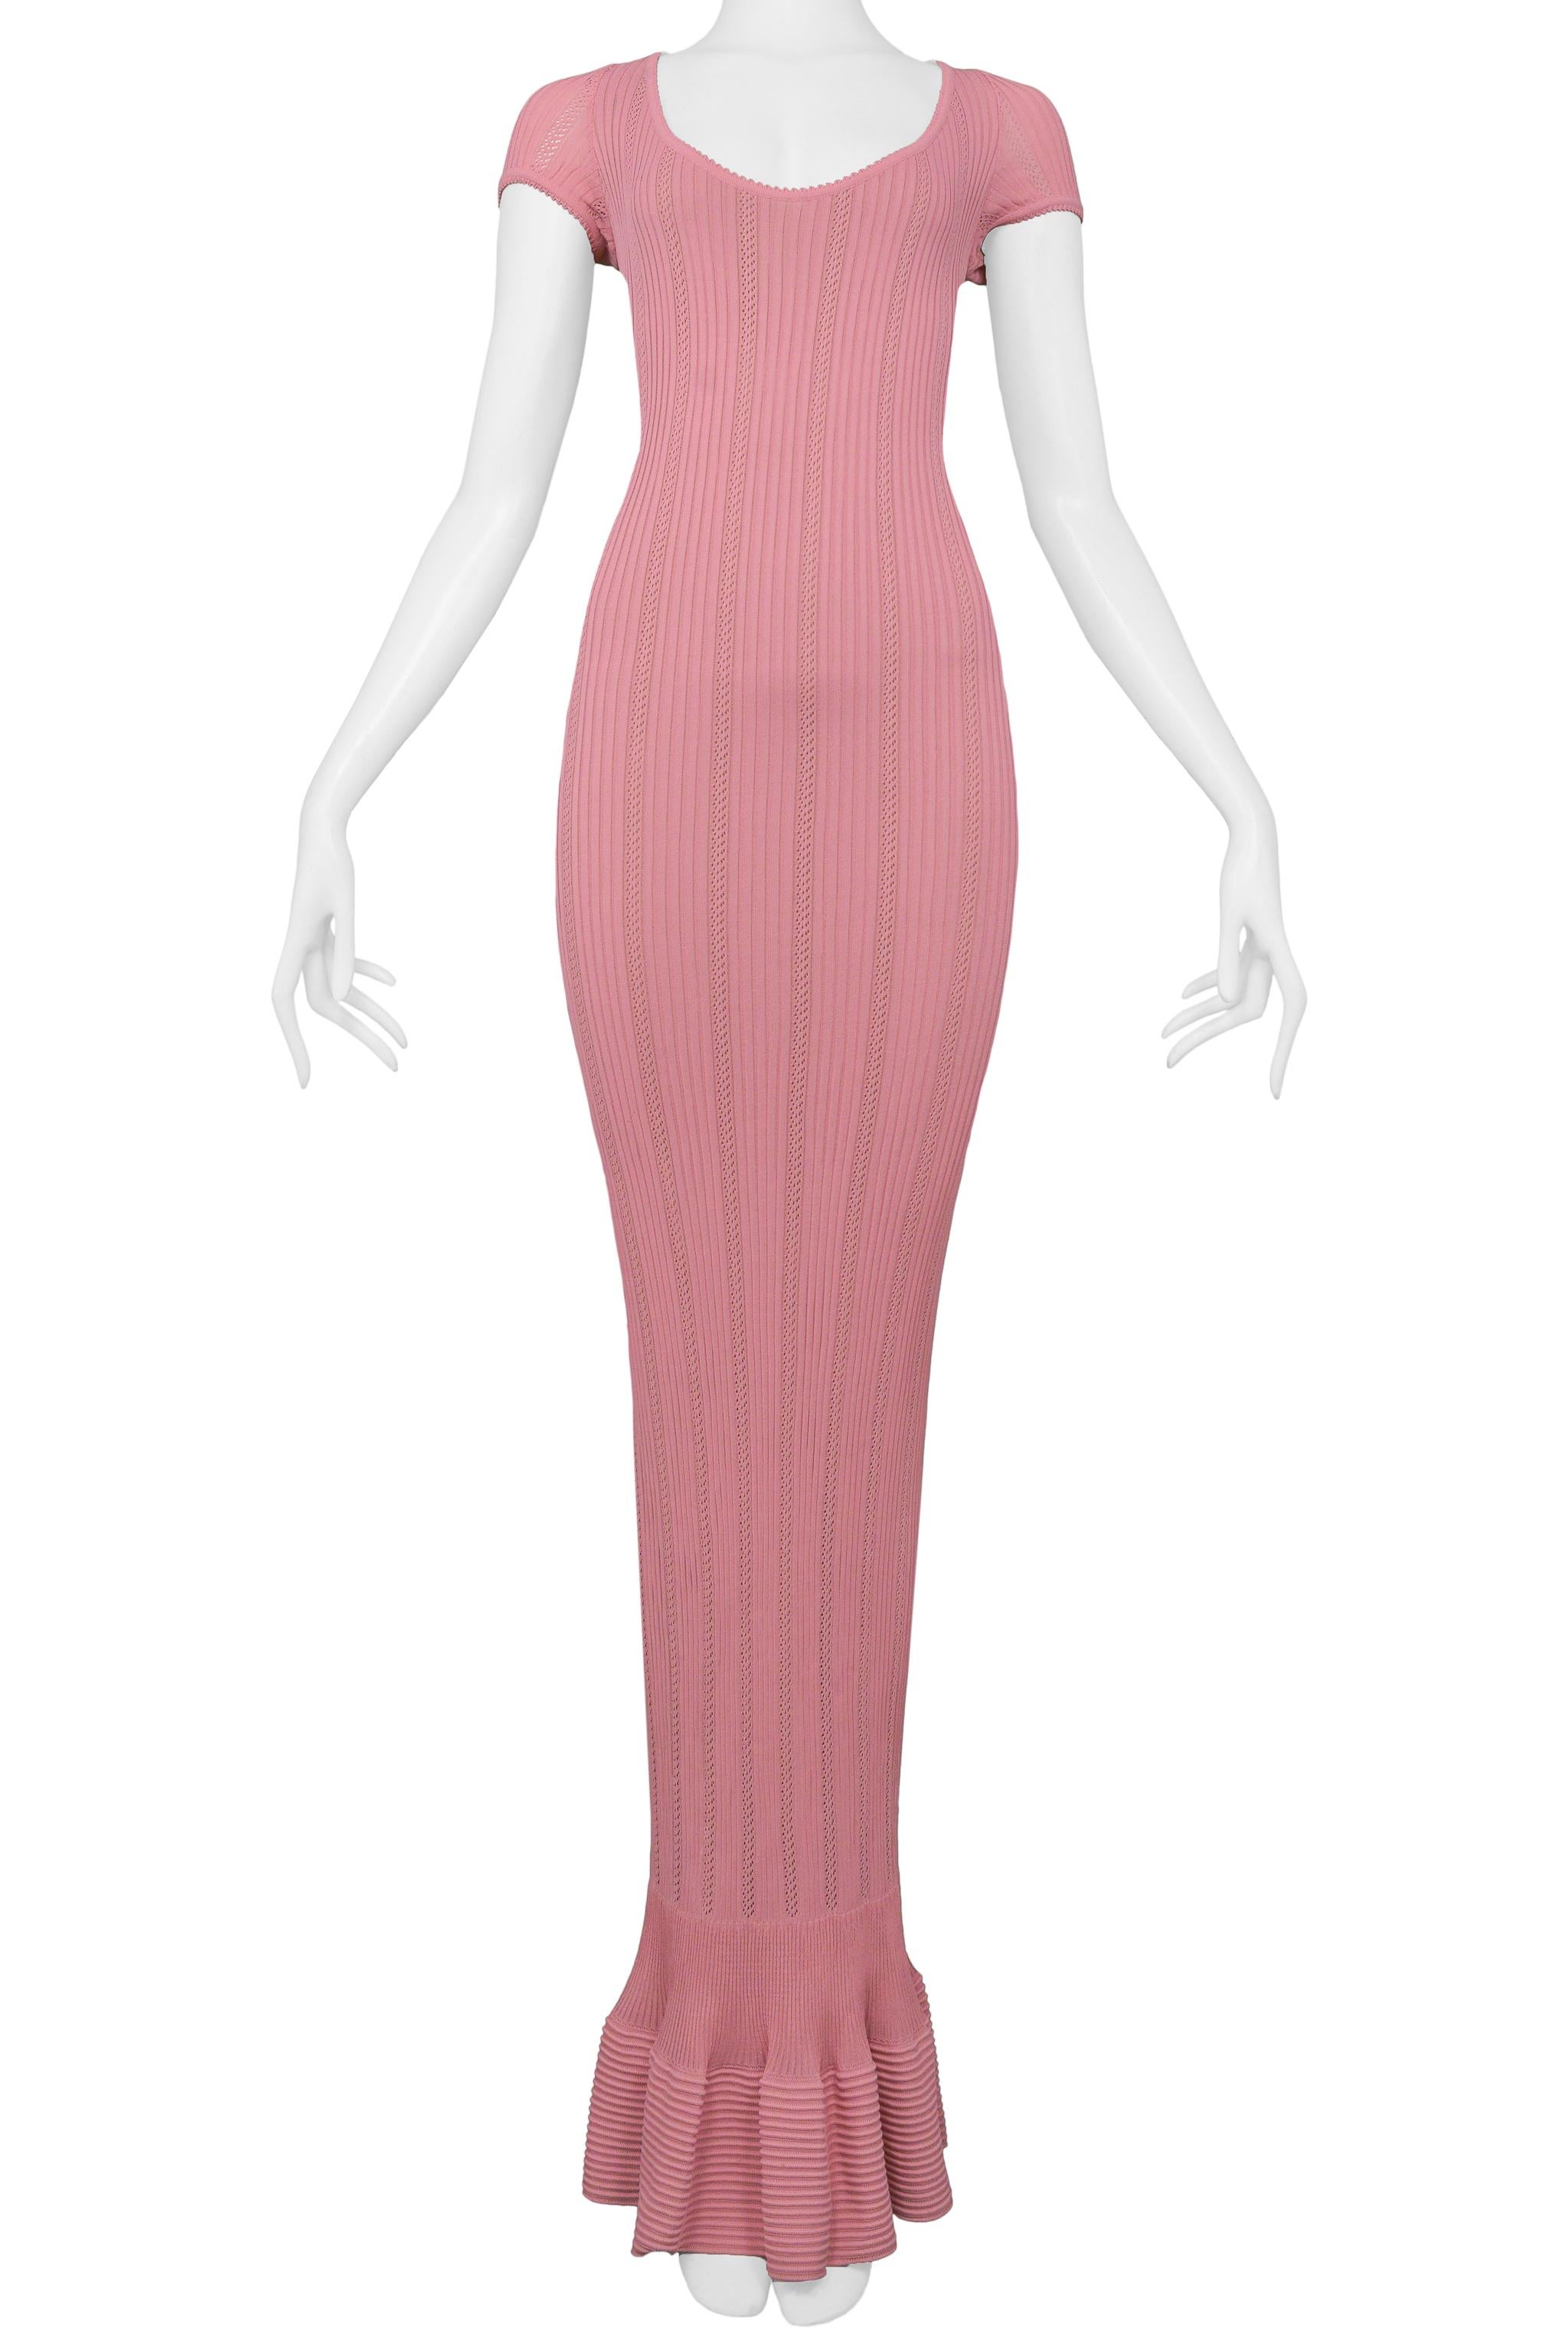 Alaia Pink Knit Bodycon Mermaid Dress SS 1996 In Excellent Condition For Sale In Los Angeles, CA